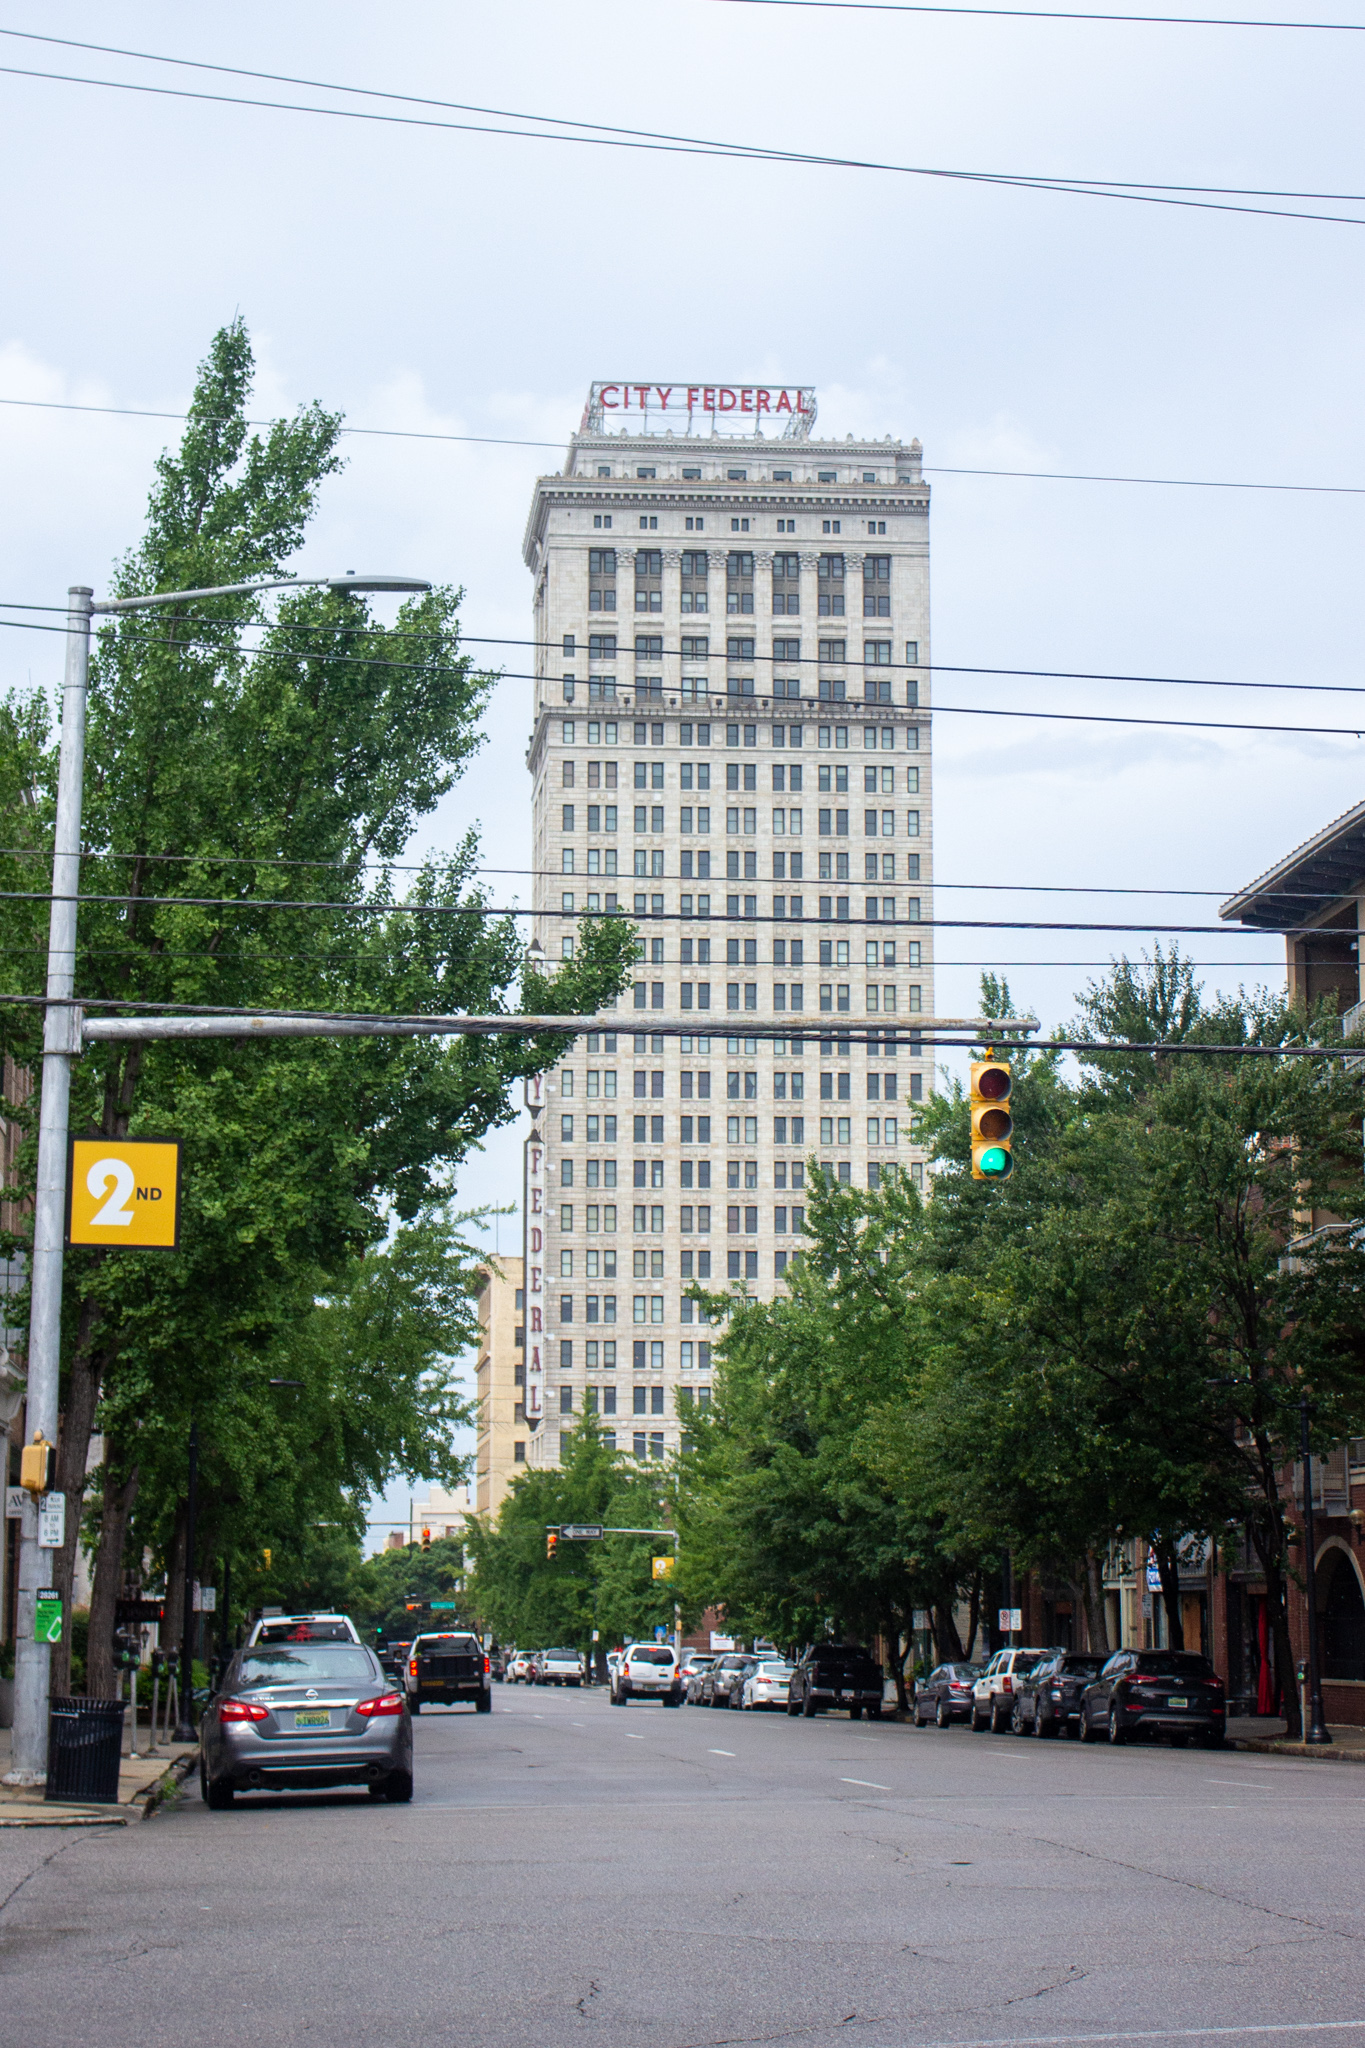 Second Avenue looks good even on a rainy day. Photo by Libby Foster for Bham Now